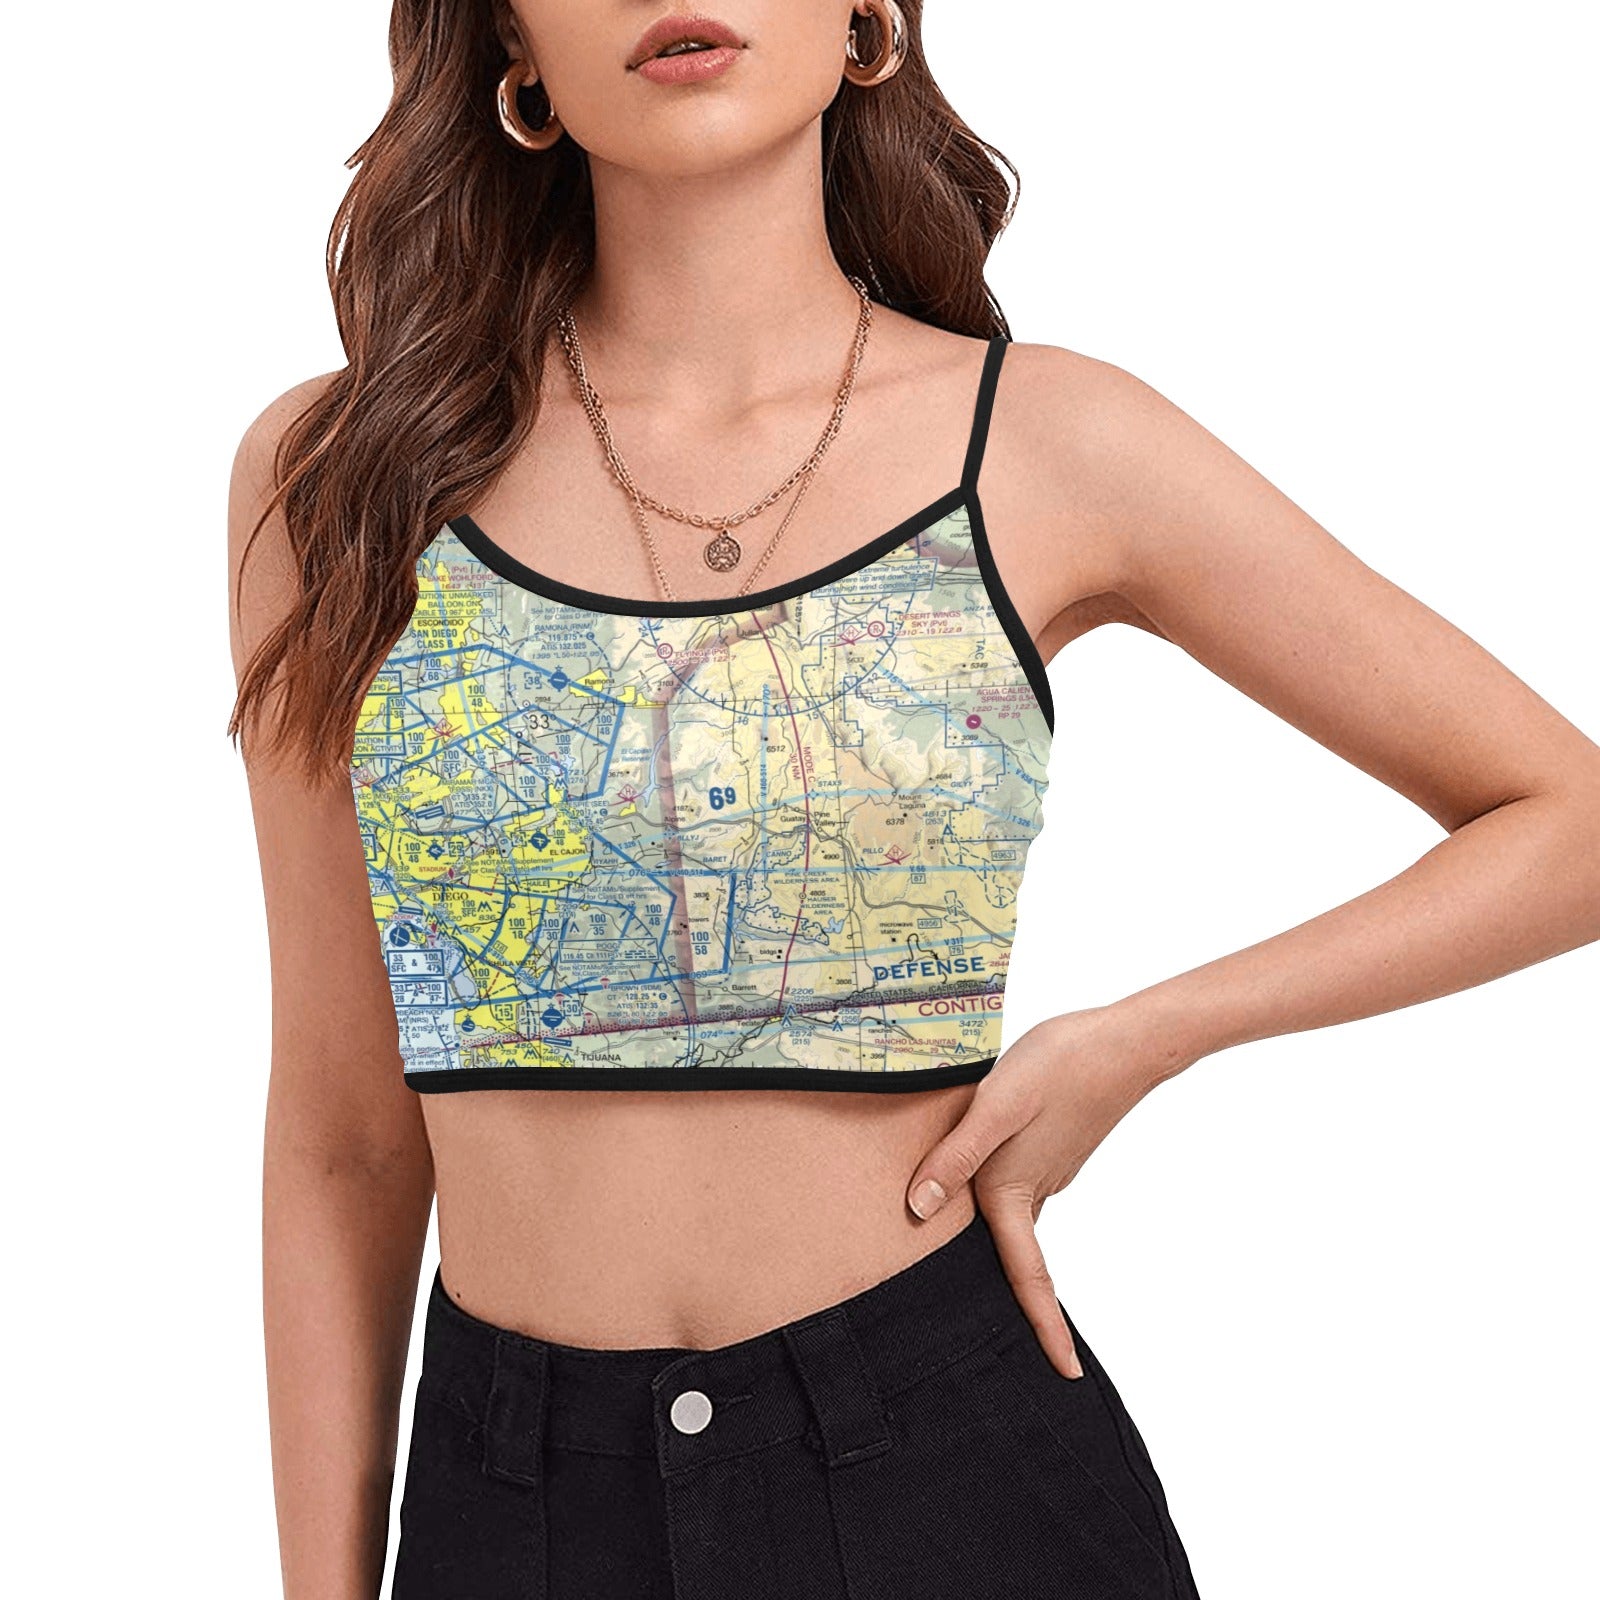 Sloan Zip Front Strappy Back Crop - 2741 – My Own Design